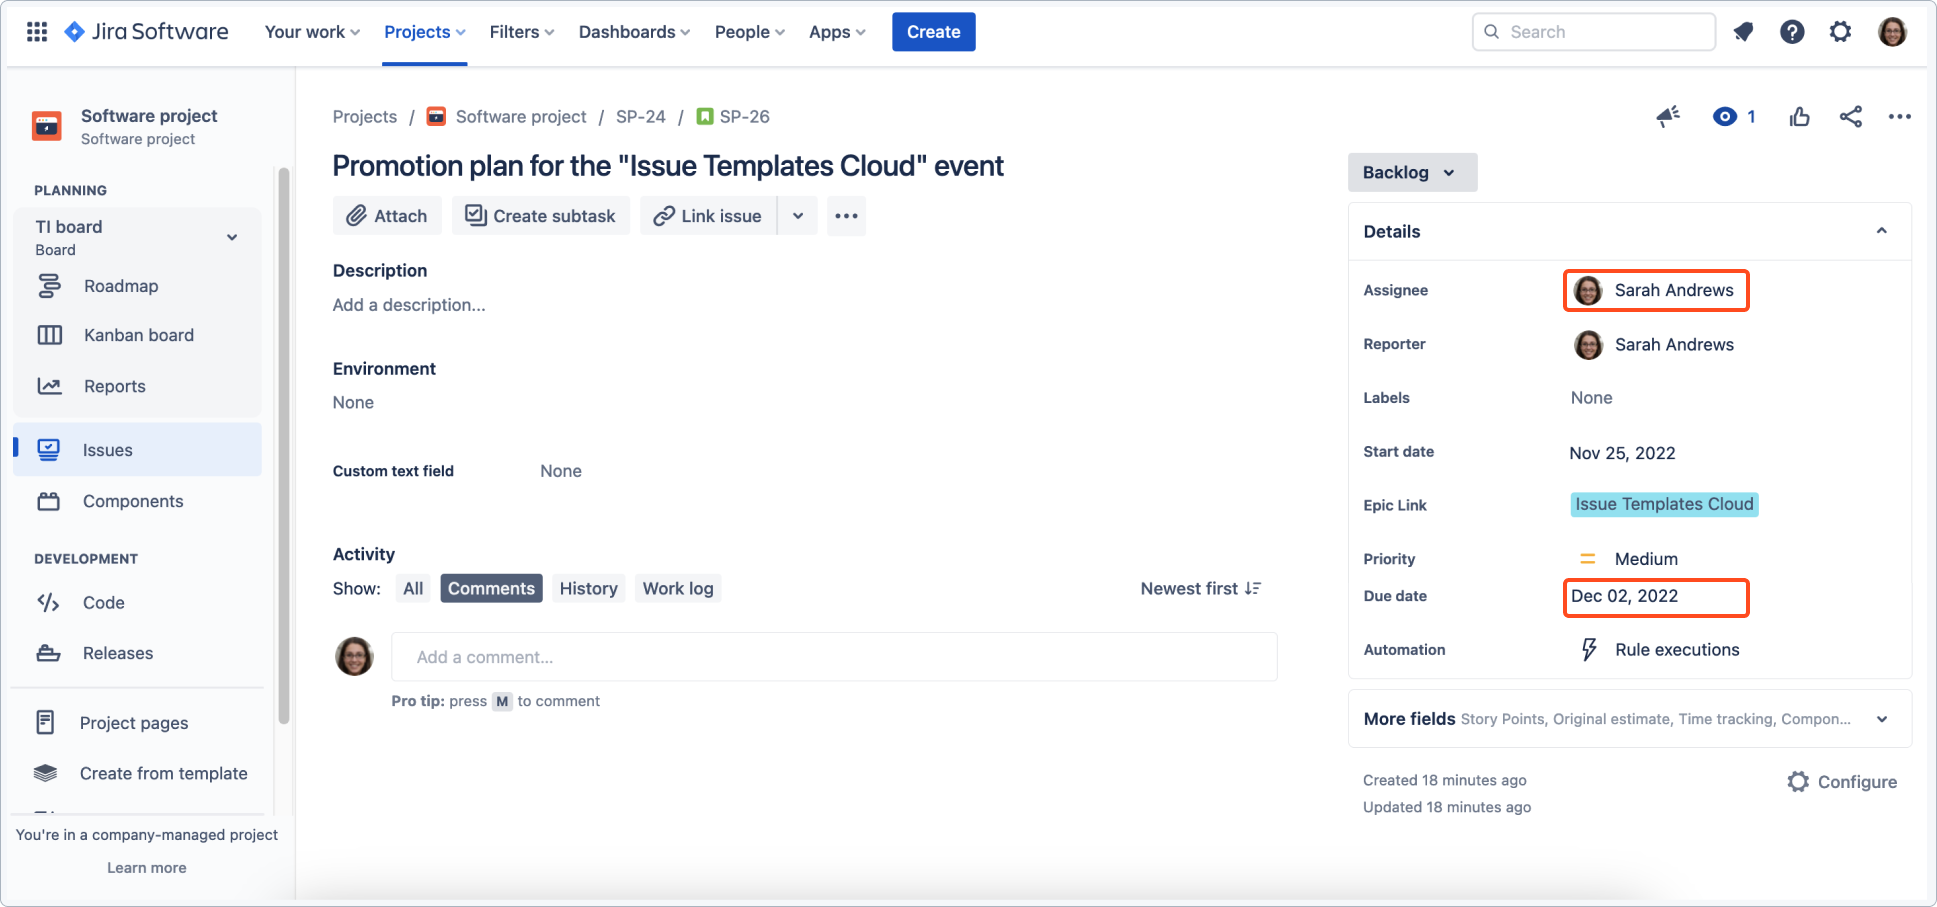 Issue Templates for Jira Cloud: Static Variables